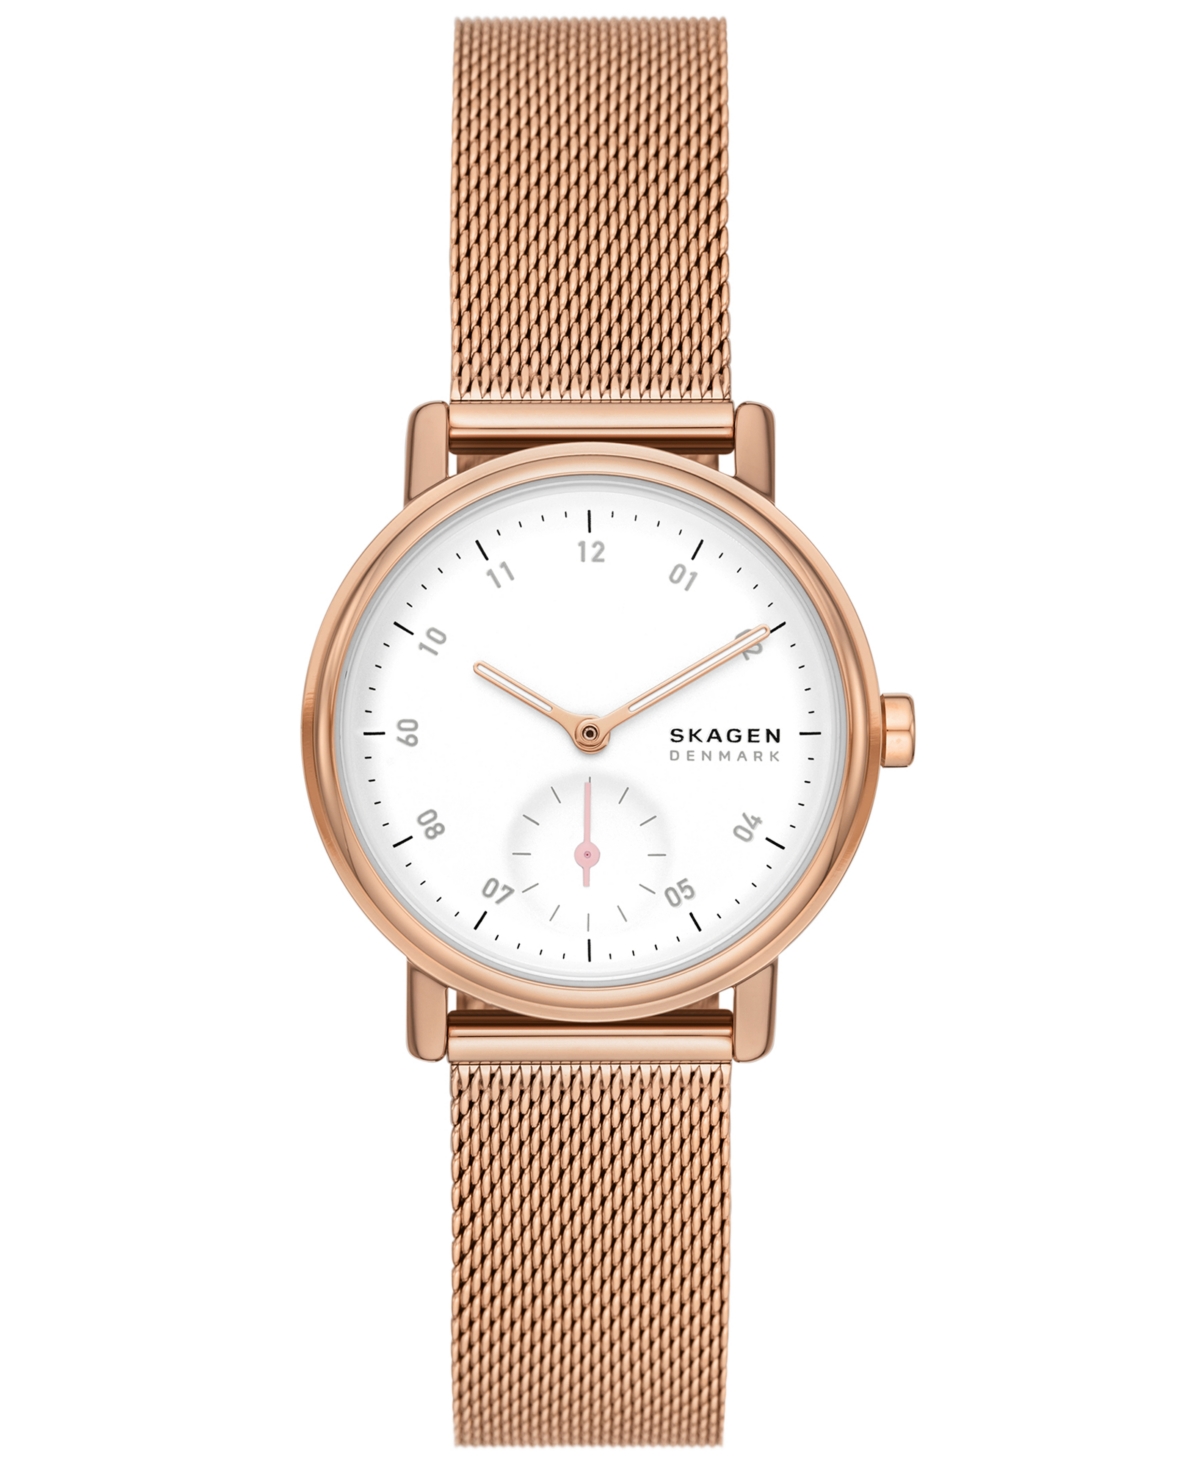 Women's Kuppel Lille Quartz Three Hand Rose Gold-Tone Stainless Steel Watch, 32mm - Rose Gold